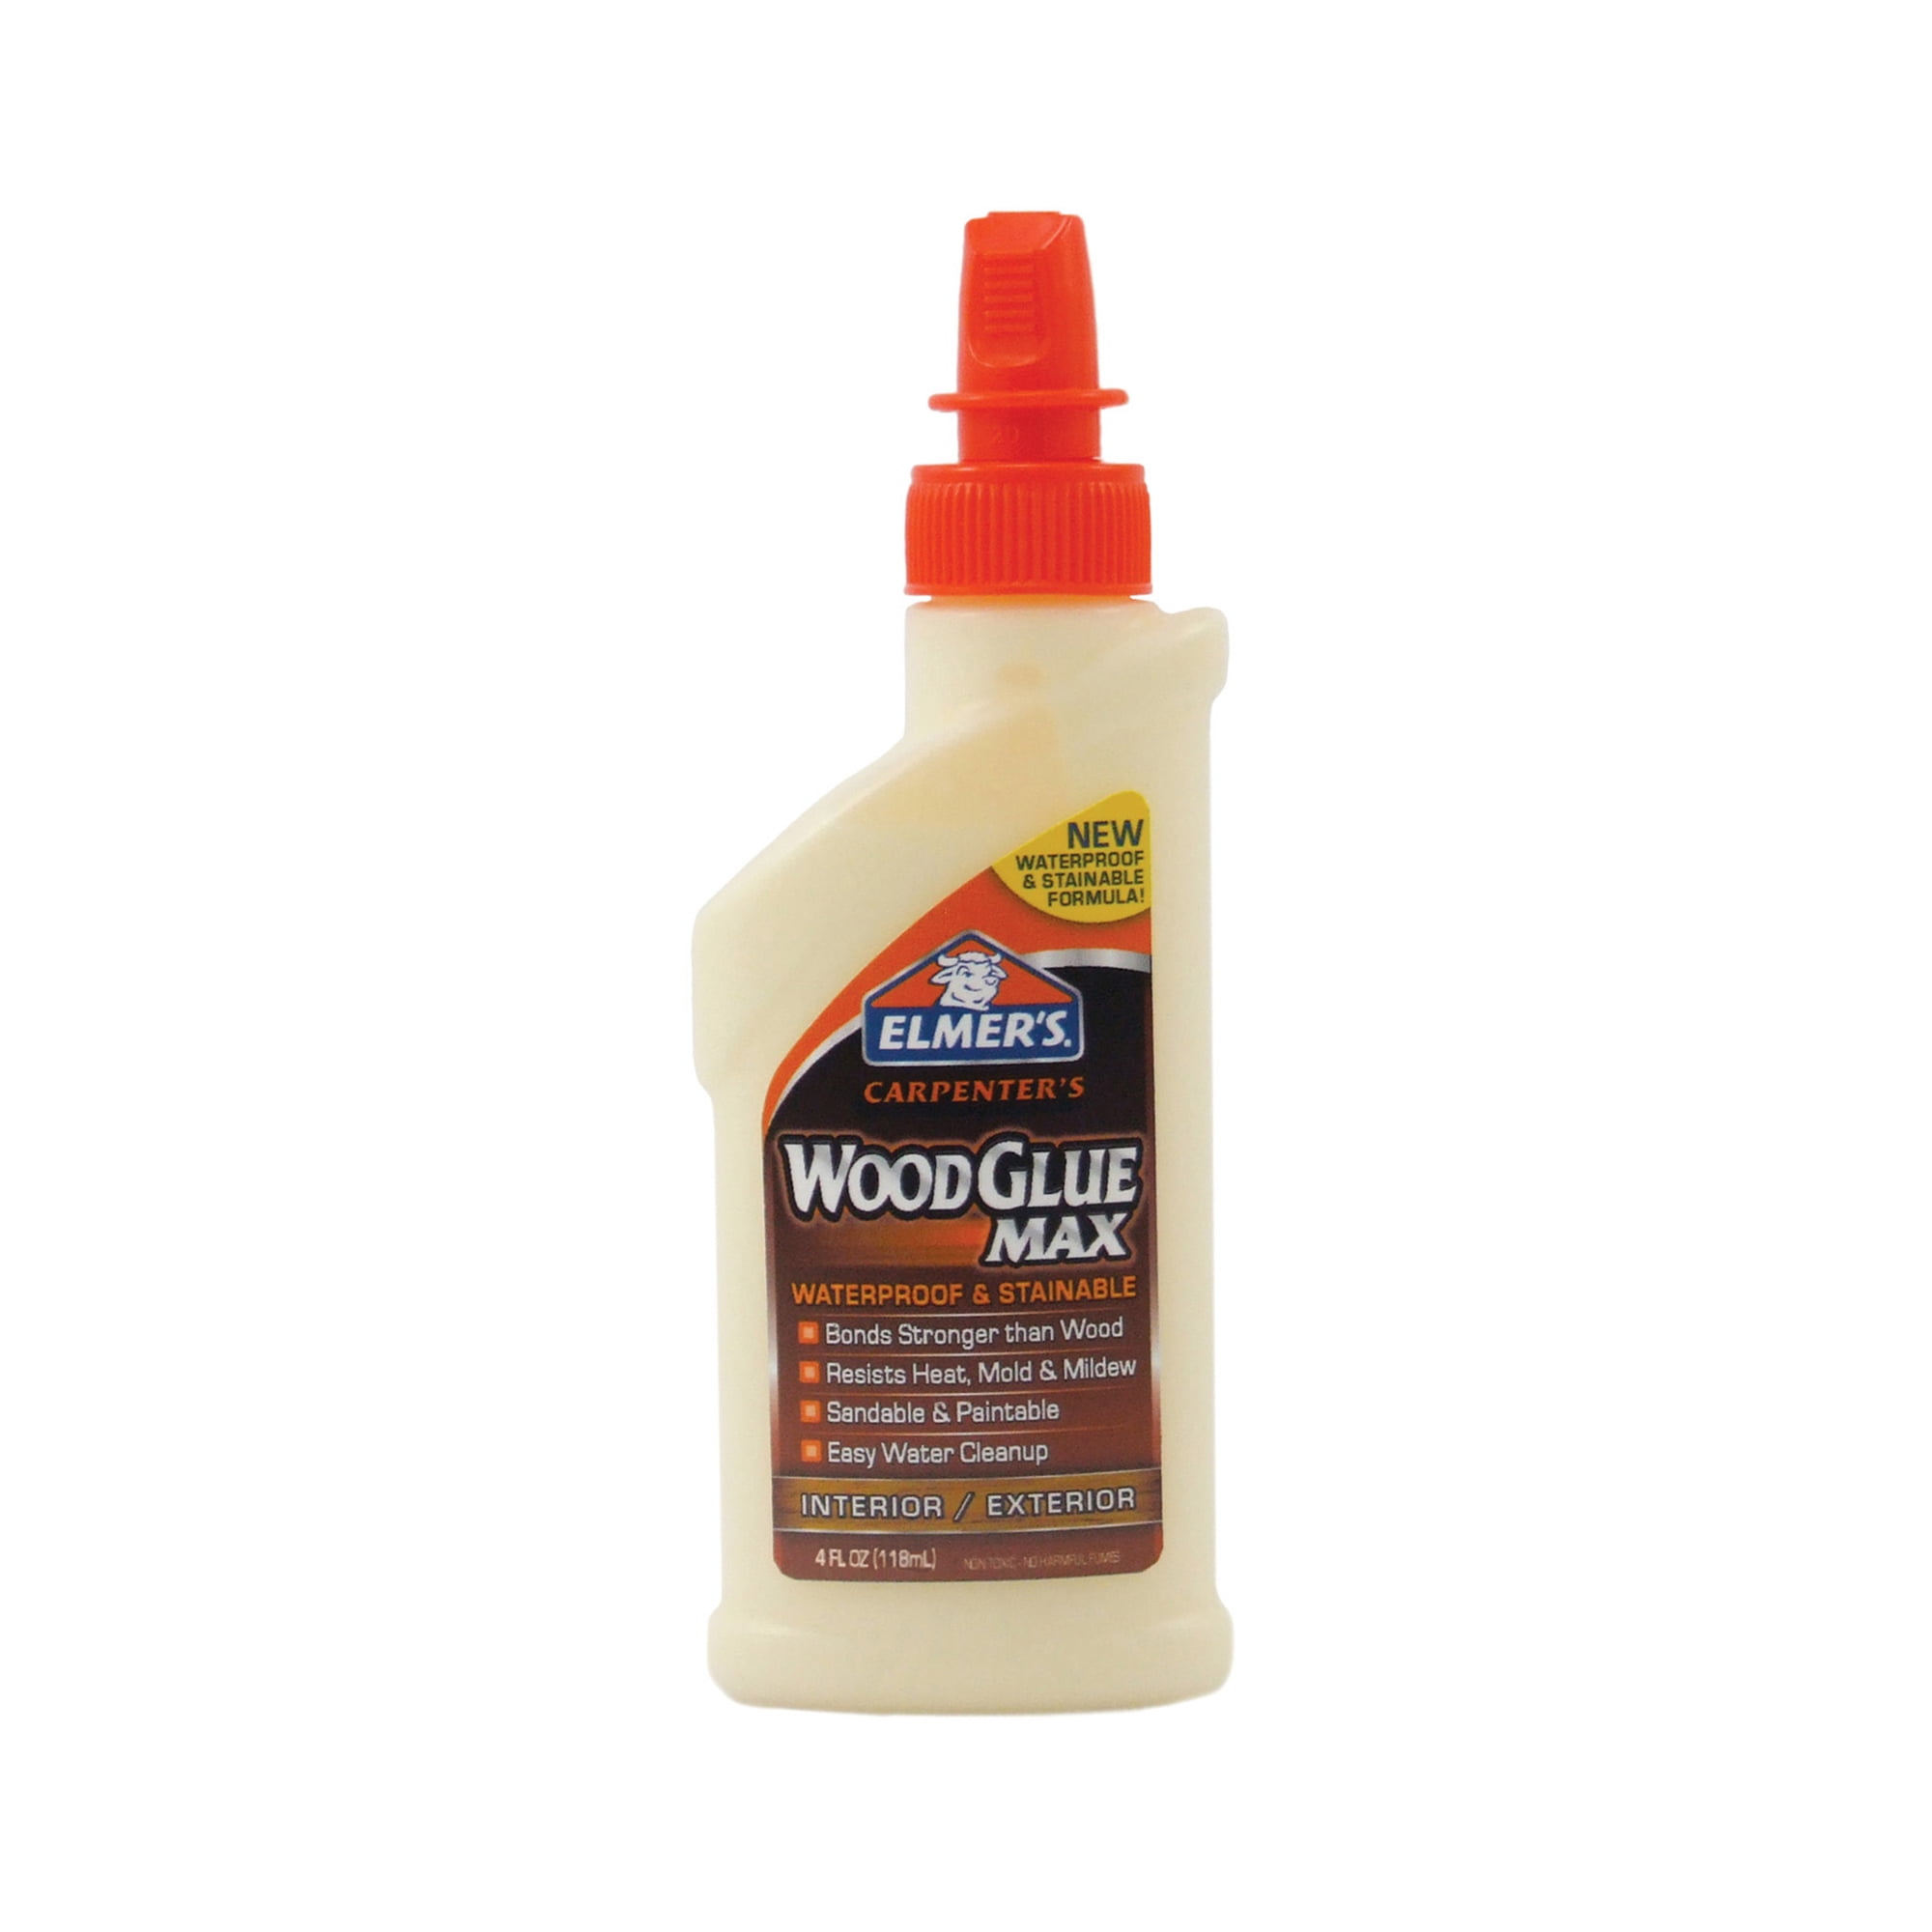 Non-Woven Fabric Handmade Liquid Clear Alcohol Glue for Types of Household  Repair and Craft Works - China Alcohol Glue, Fabric Silicona Liquid Adhesive